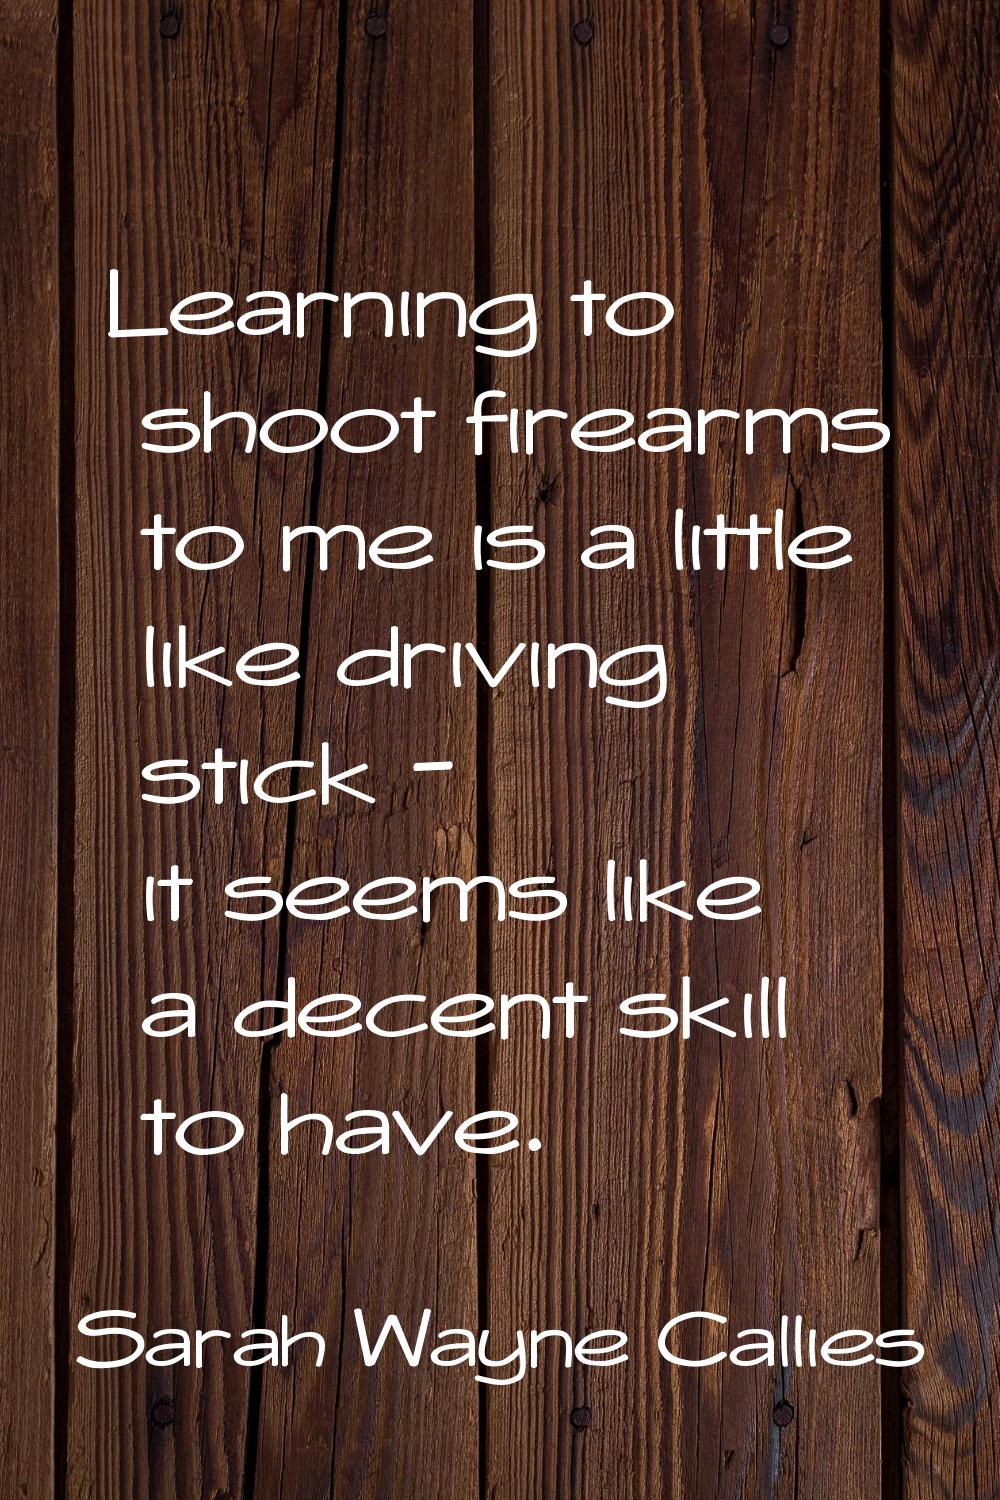 Learning to shoot firearms to me is a little like driving stick - it seems like a decent skill to h